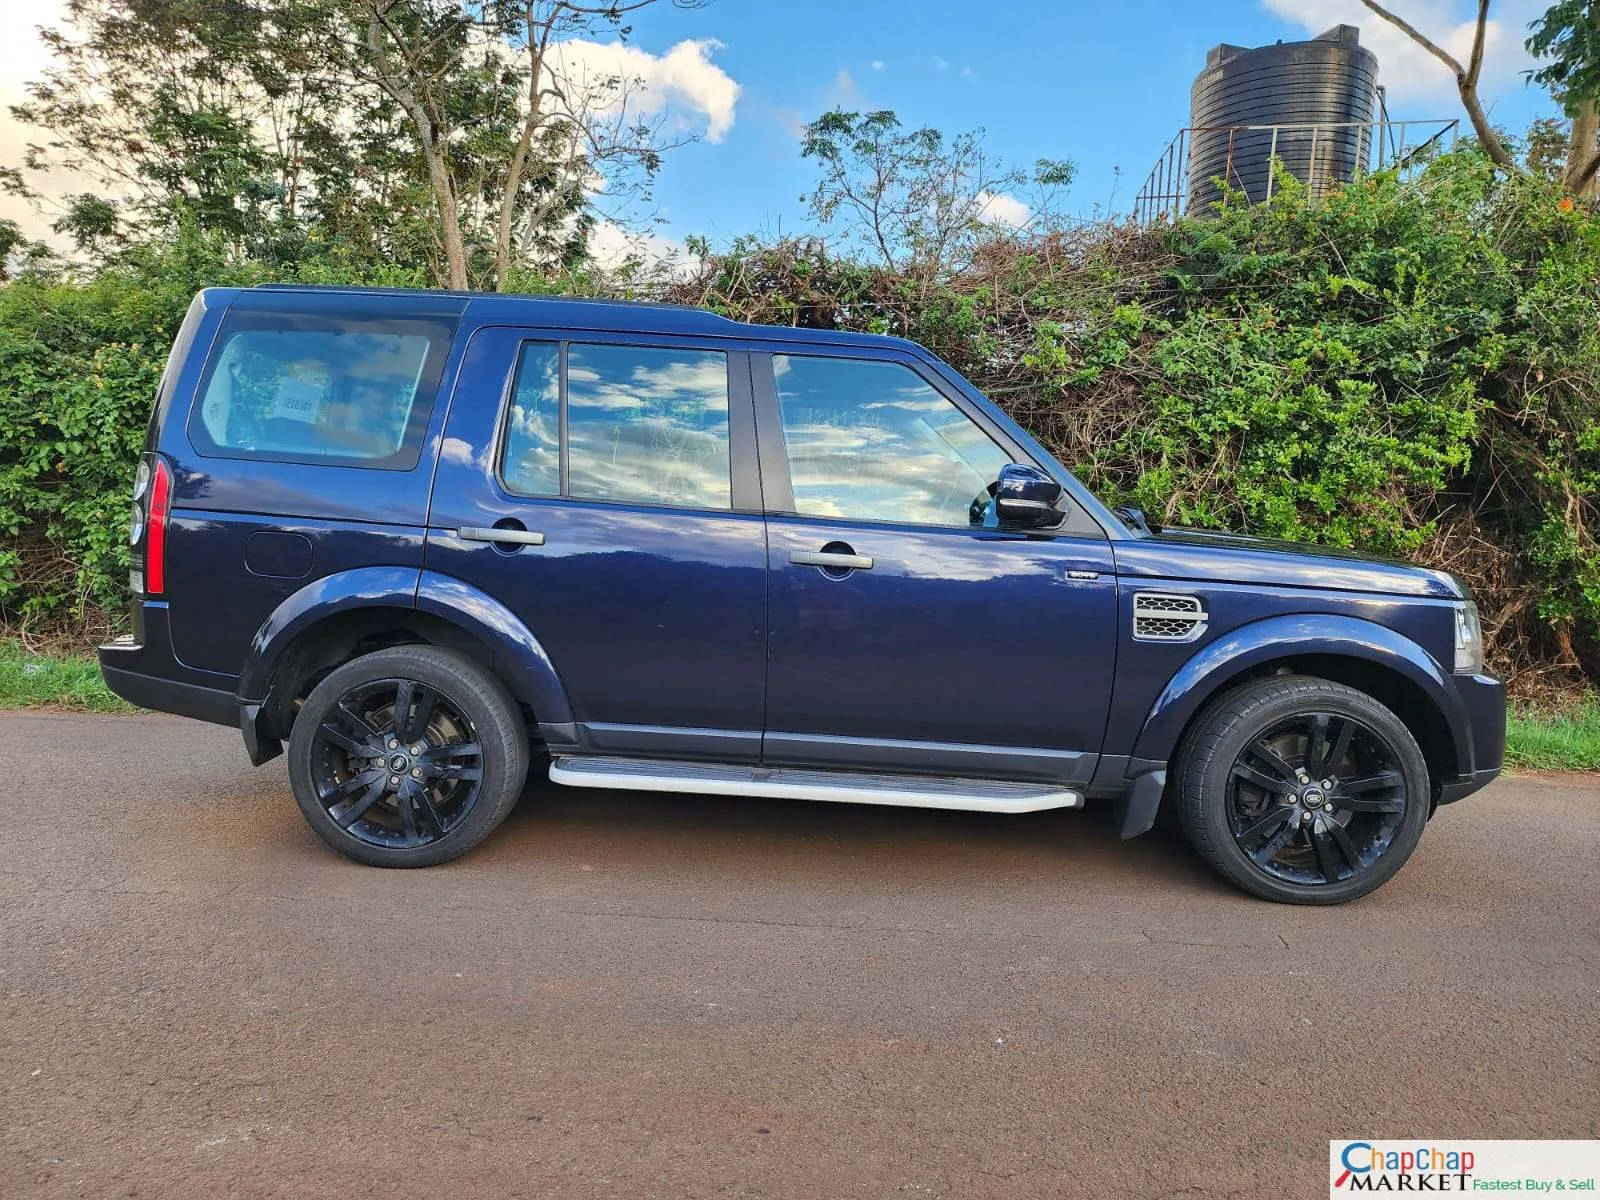 Cars Cars For Sale/Vehicles-Land Rover Discovery 4 Just ARRIVED QUICK SALE Trade in Ok 9